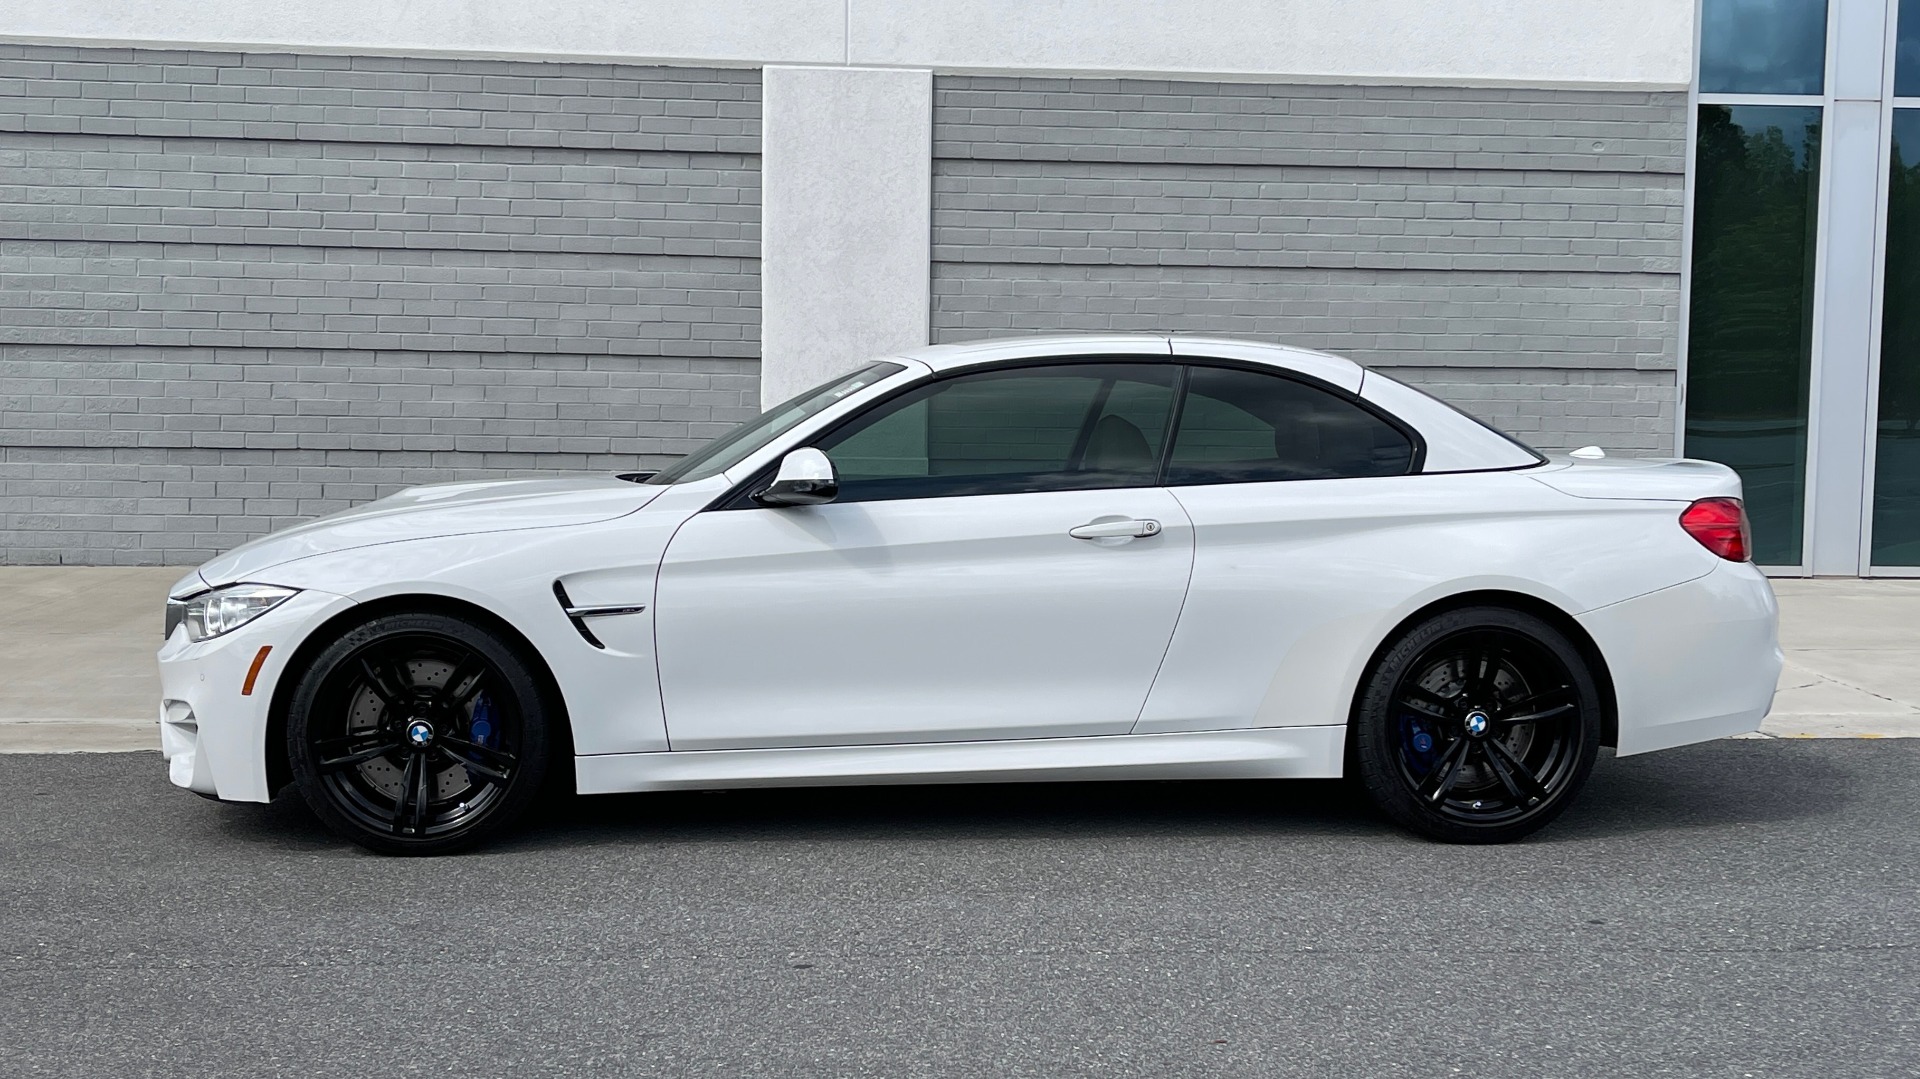 Used 2016 BMW M4 CONVERTIBLE 3.0L / 7-SPD AUTO / EXECUTIVE / ADAPT M SUSP / REARVIEW for sale Sold at Formula Imports in Charlotte NC 28227 9